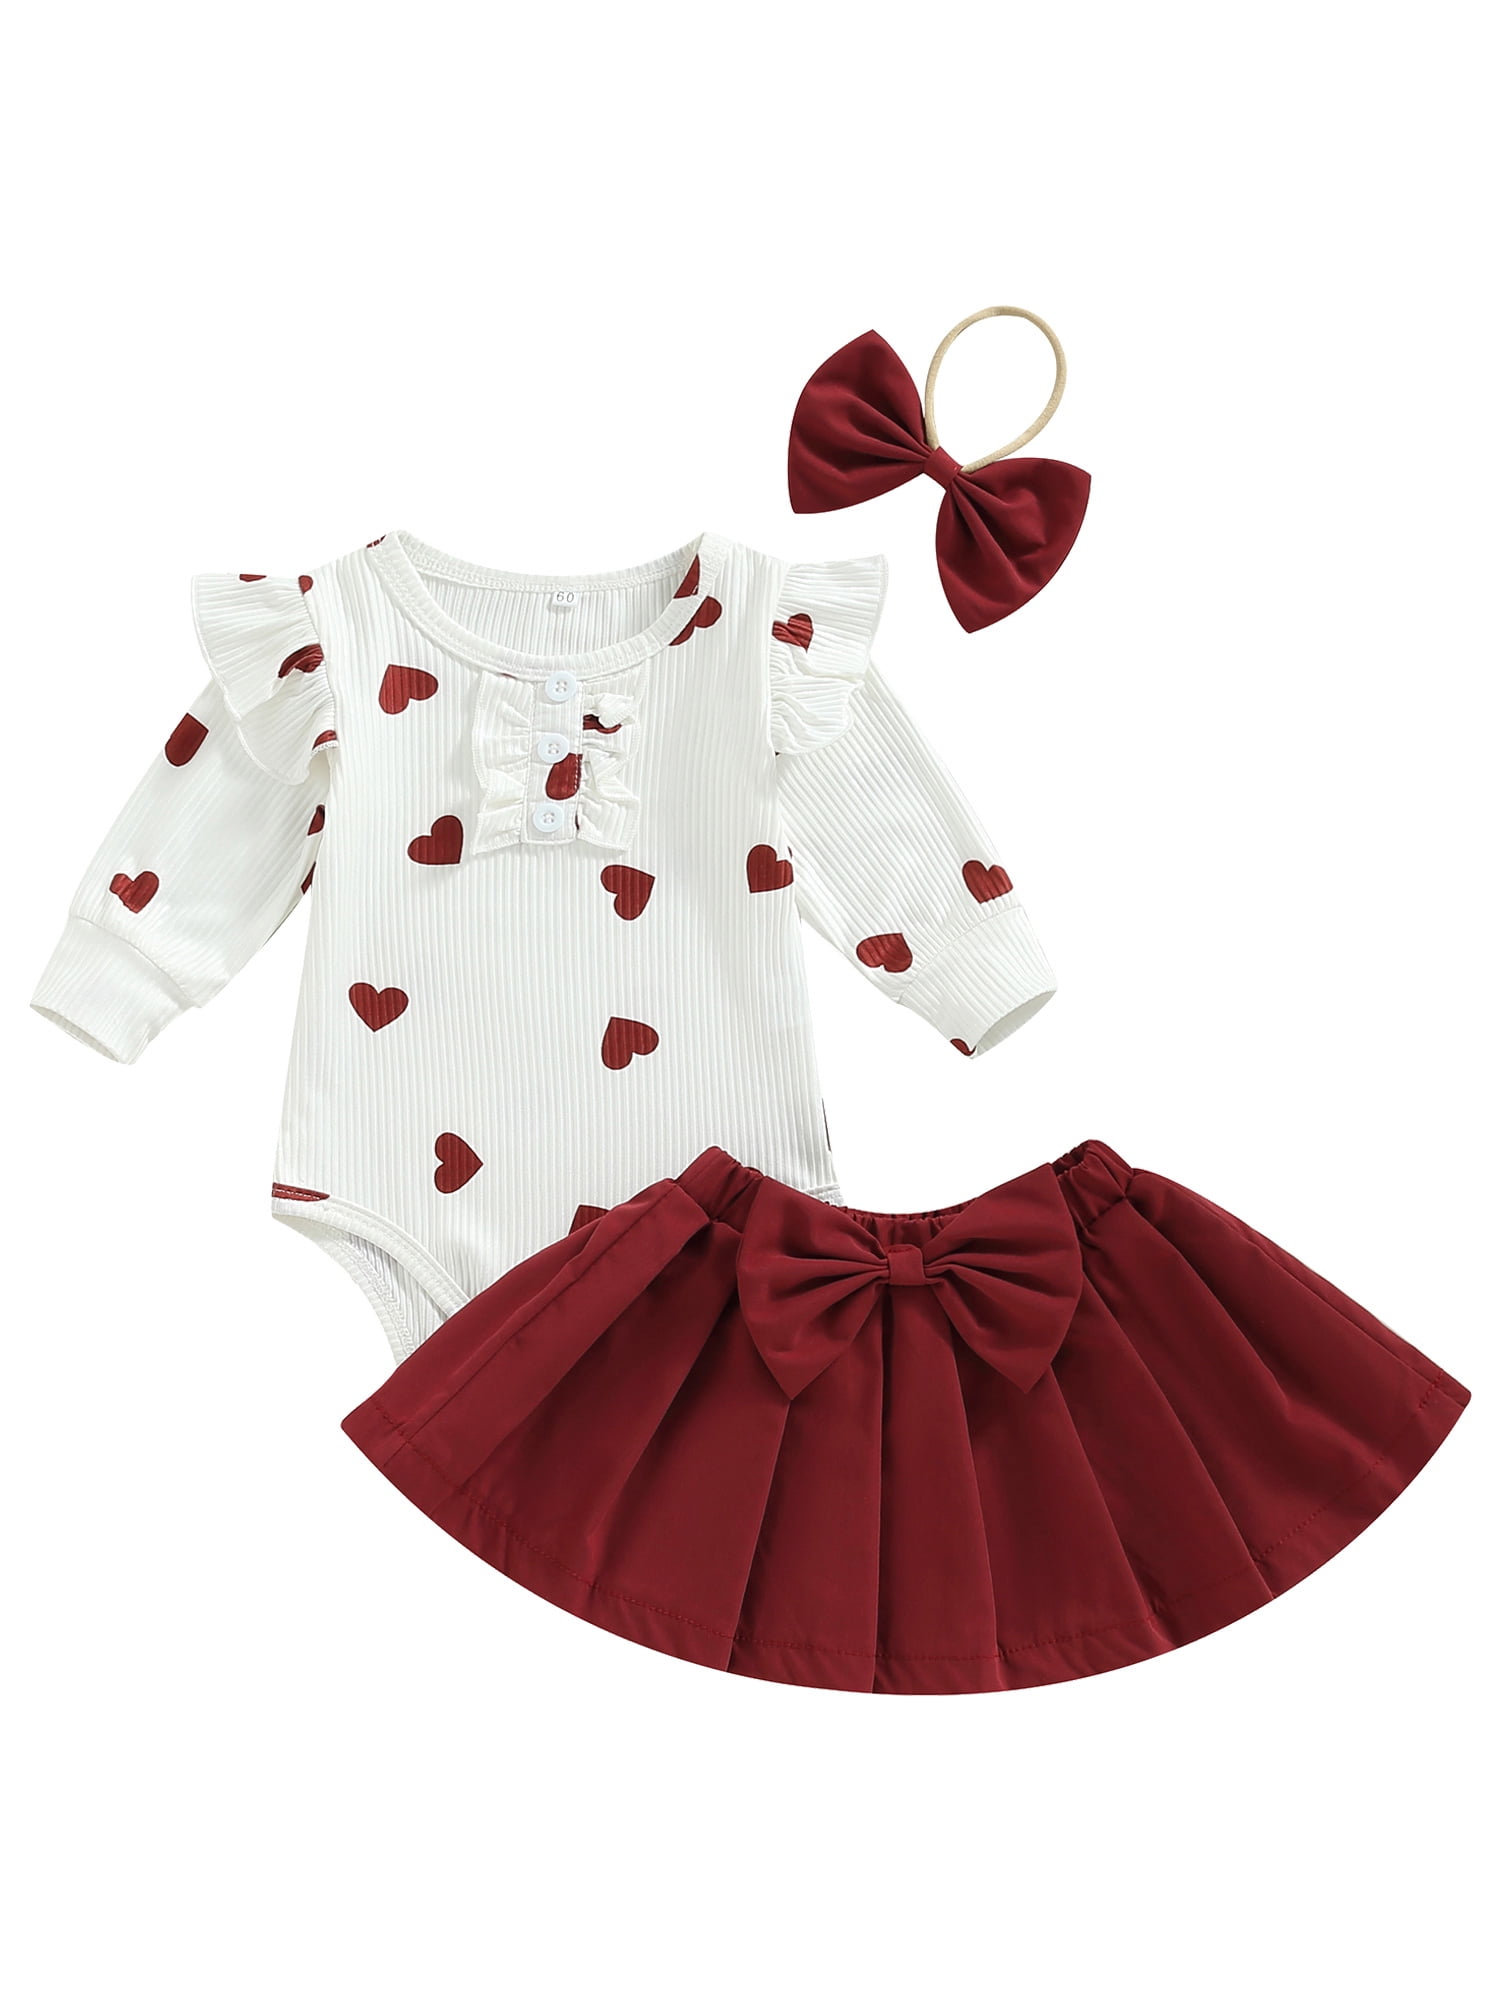 Calsunbaby Infant Toddler Baby Girls Valentine 's Day Outfits Romper ...